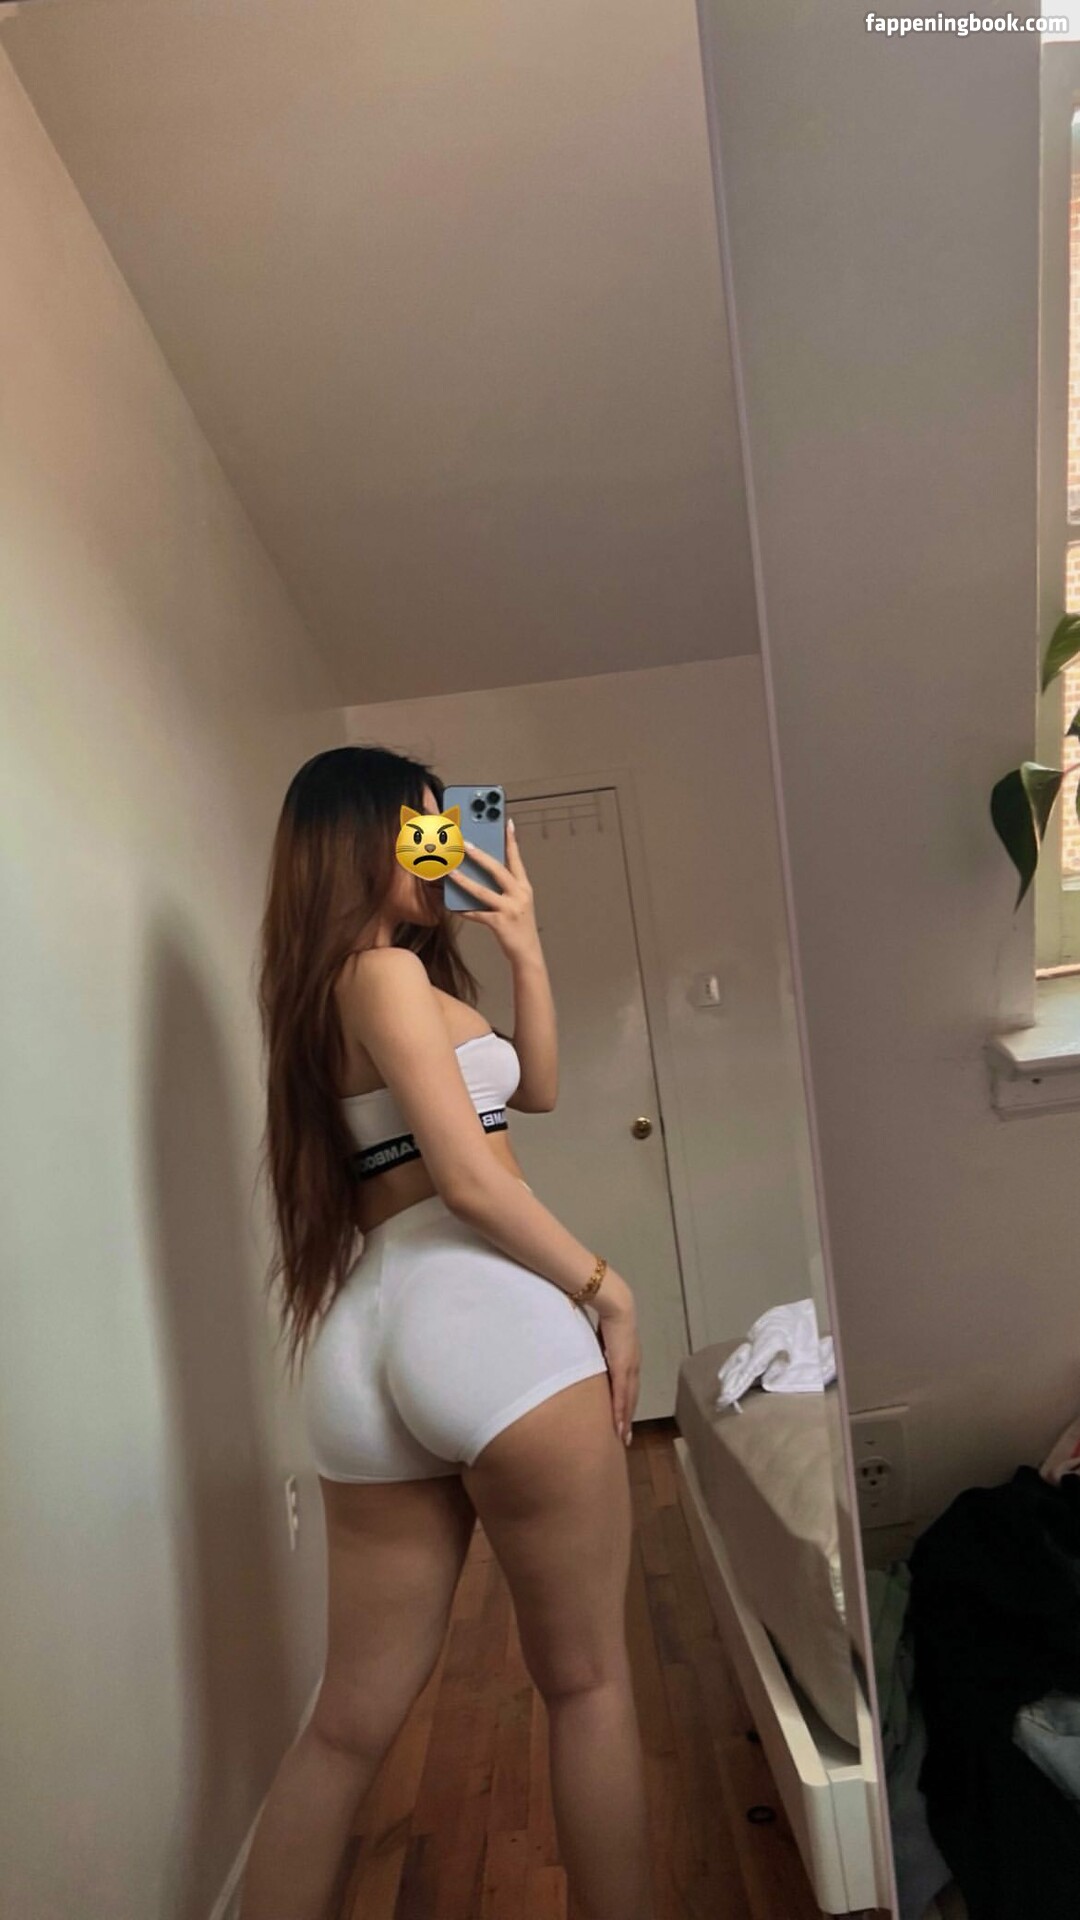 cvndxo candyliu onlyfans the fappening fappeningbook